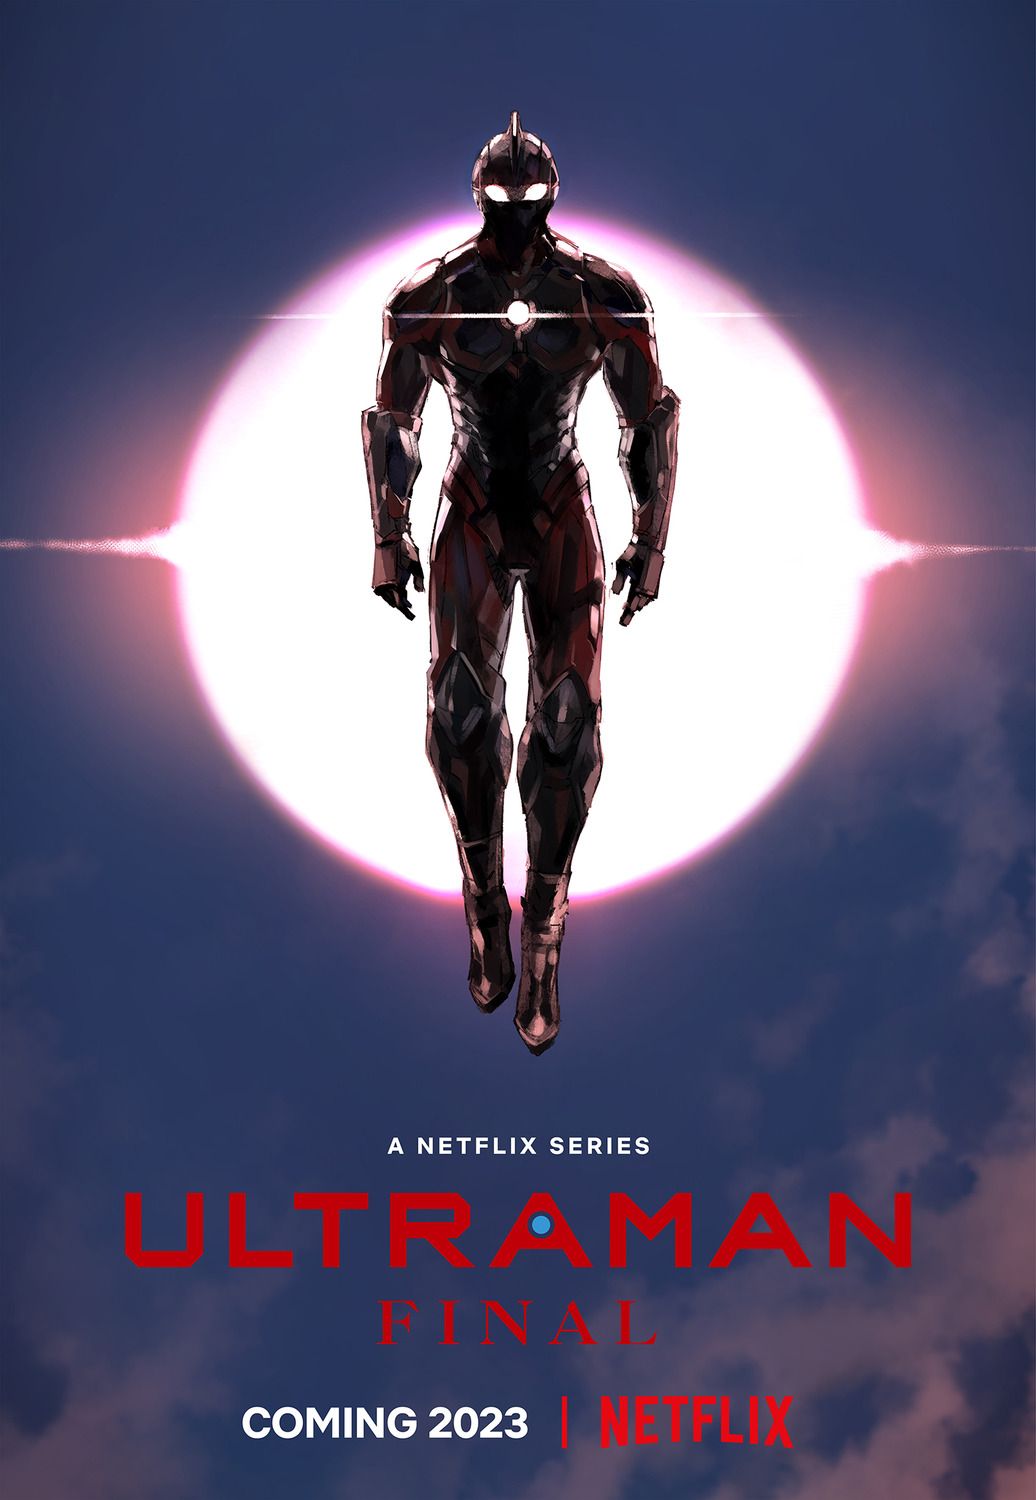 Extra Large TV Poster Image for Ultraman (#5 of 7)